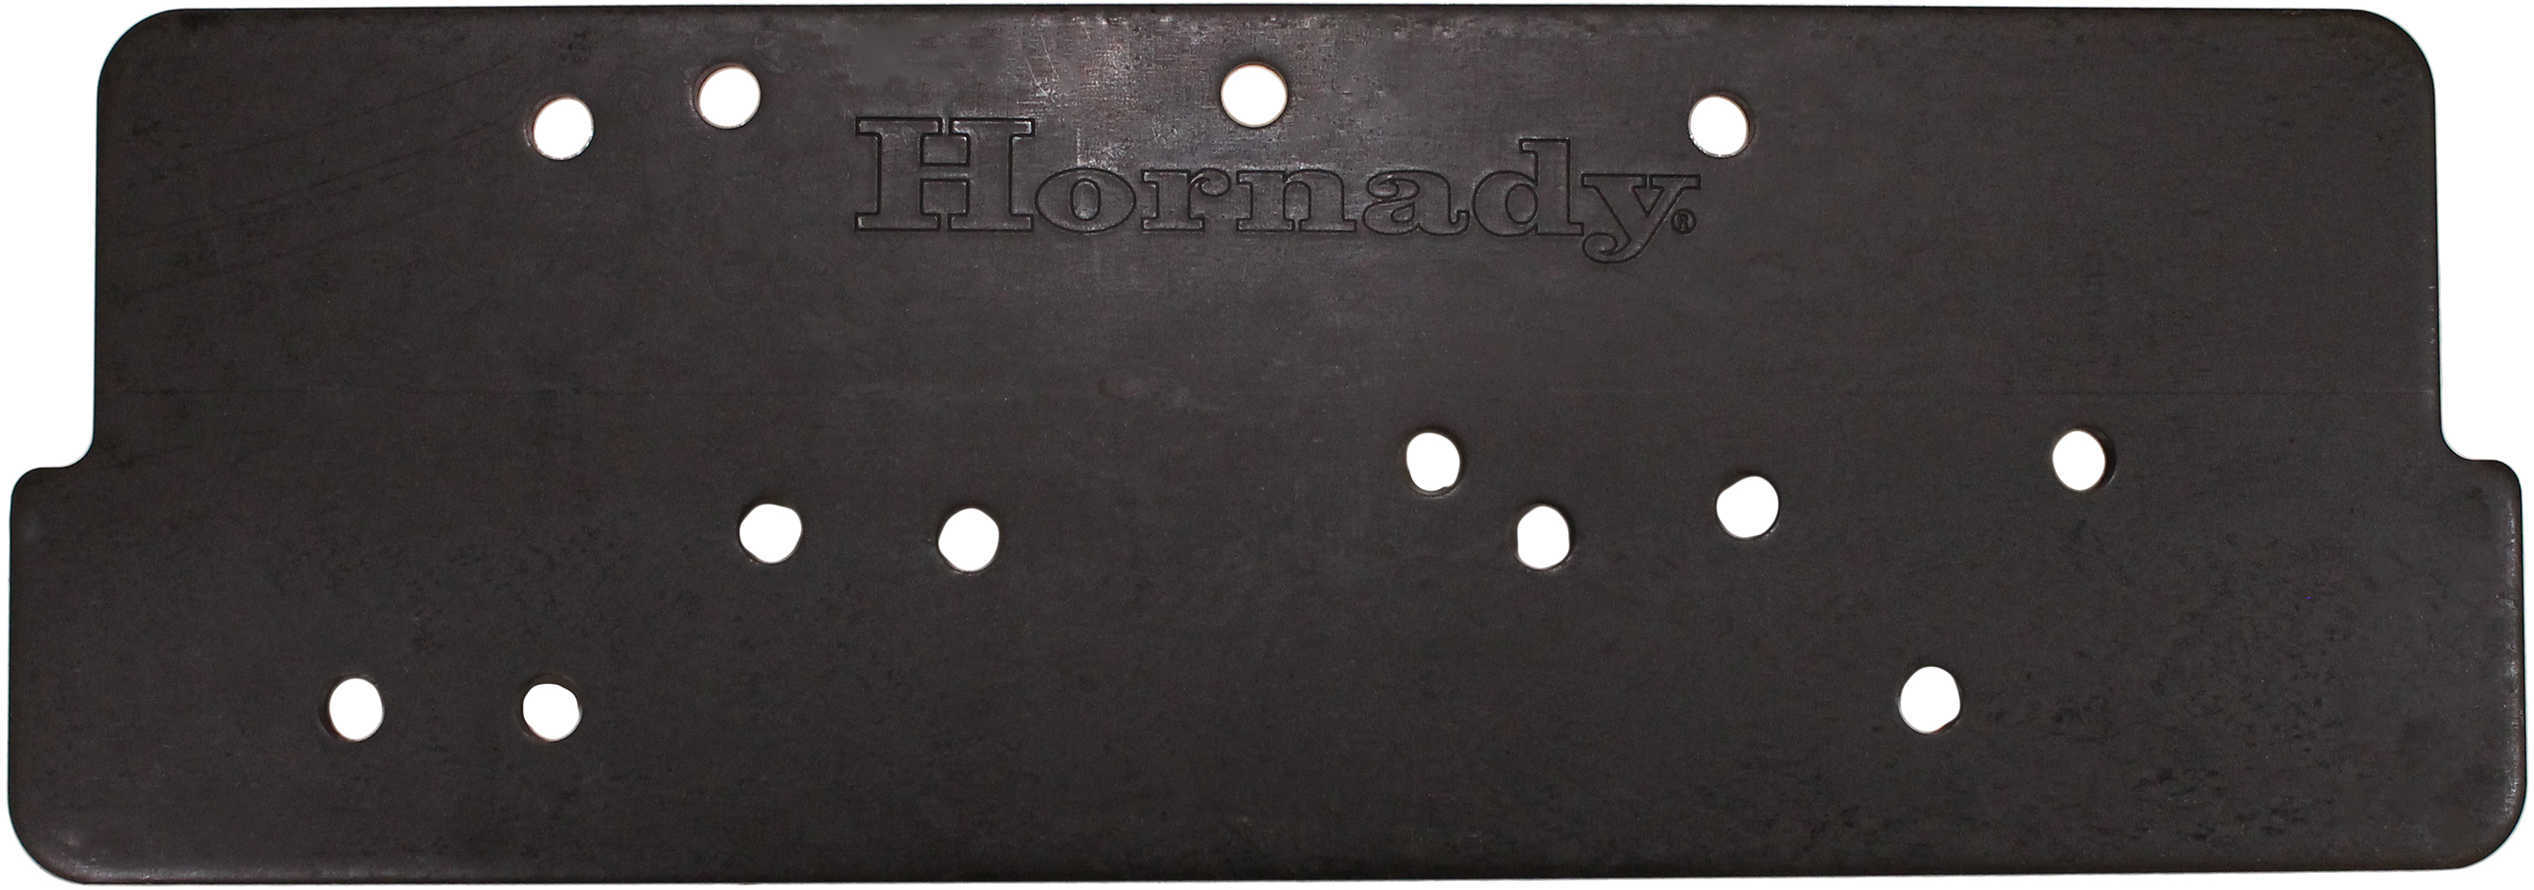 Hornady 399698 Lock-N-Load Universal Quick Detach Mounting Plate